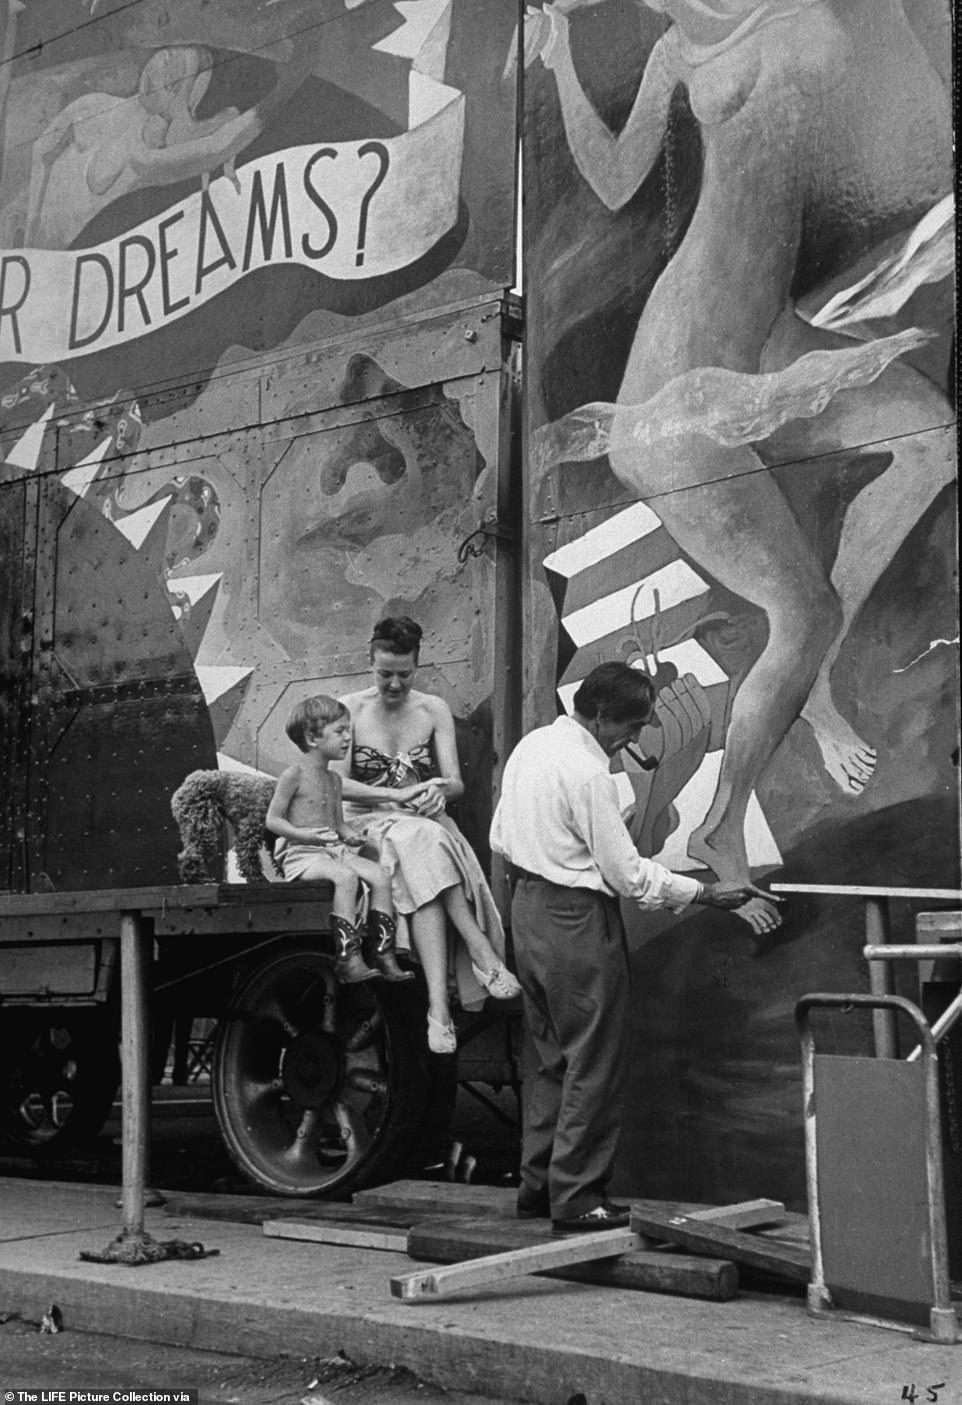 Burlesque dancer Gypsy Rose Lee sits with her son Erik Preminger in front of a mural designed by her husband, painter Julio de Diego during her carnival tour across America. Gypsy had amassed such a large fortune in burlesque that she purchased a palatial 26-room townhouse in the Upper East Side that was previously owned by the Vanderbilts and decorated it with paintings by Picasso, Chagall and Miro. She remodeled her bathroom in black and gold with a matching bathmat and toilet-seat cover made from mink